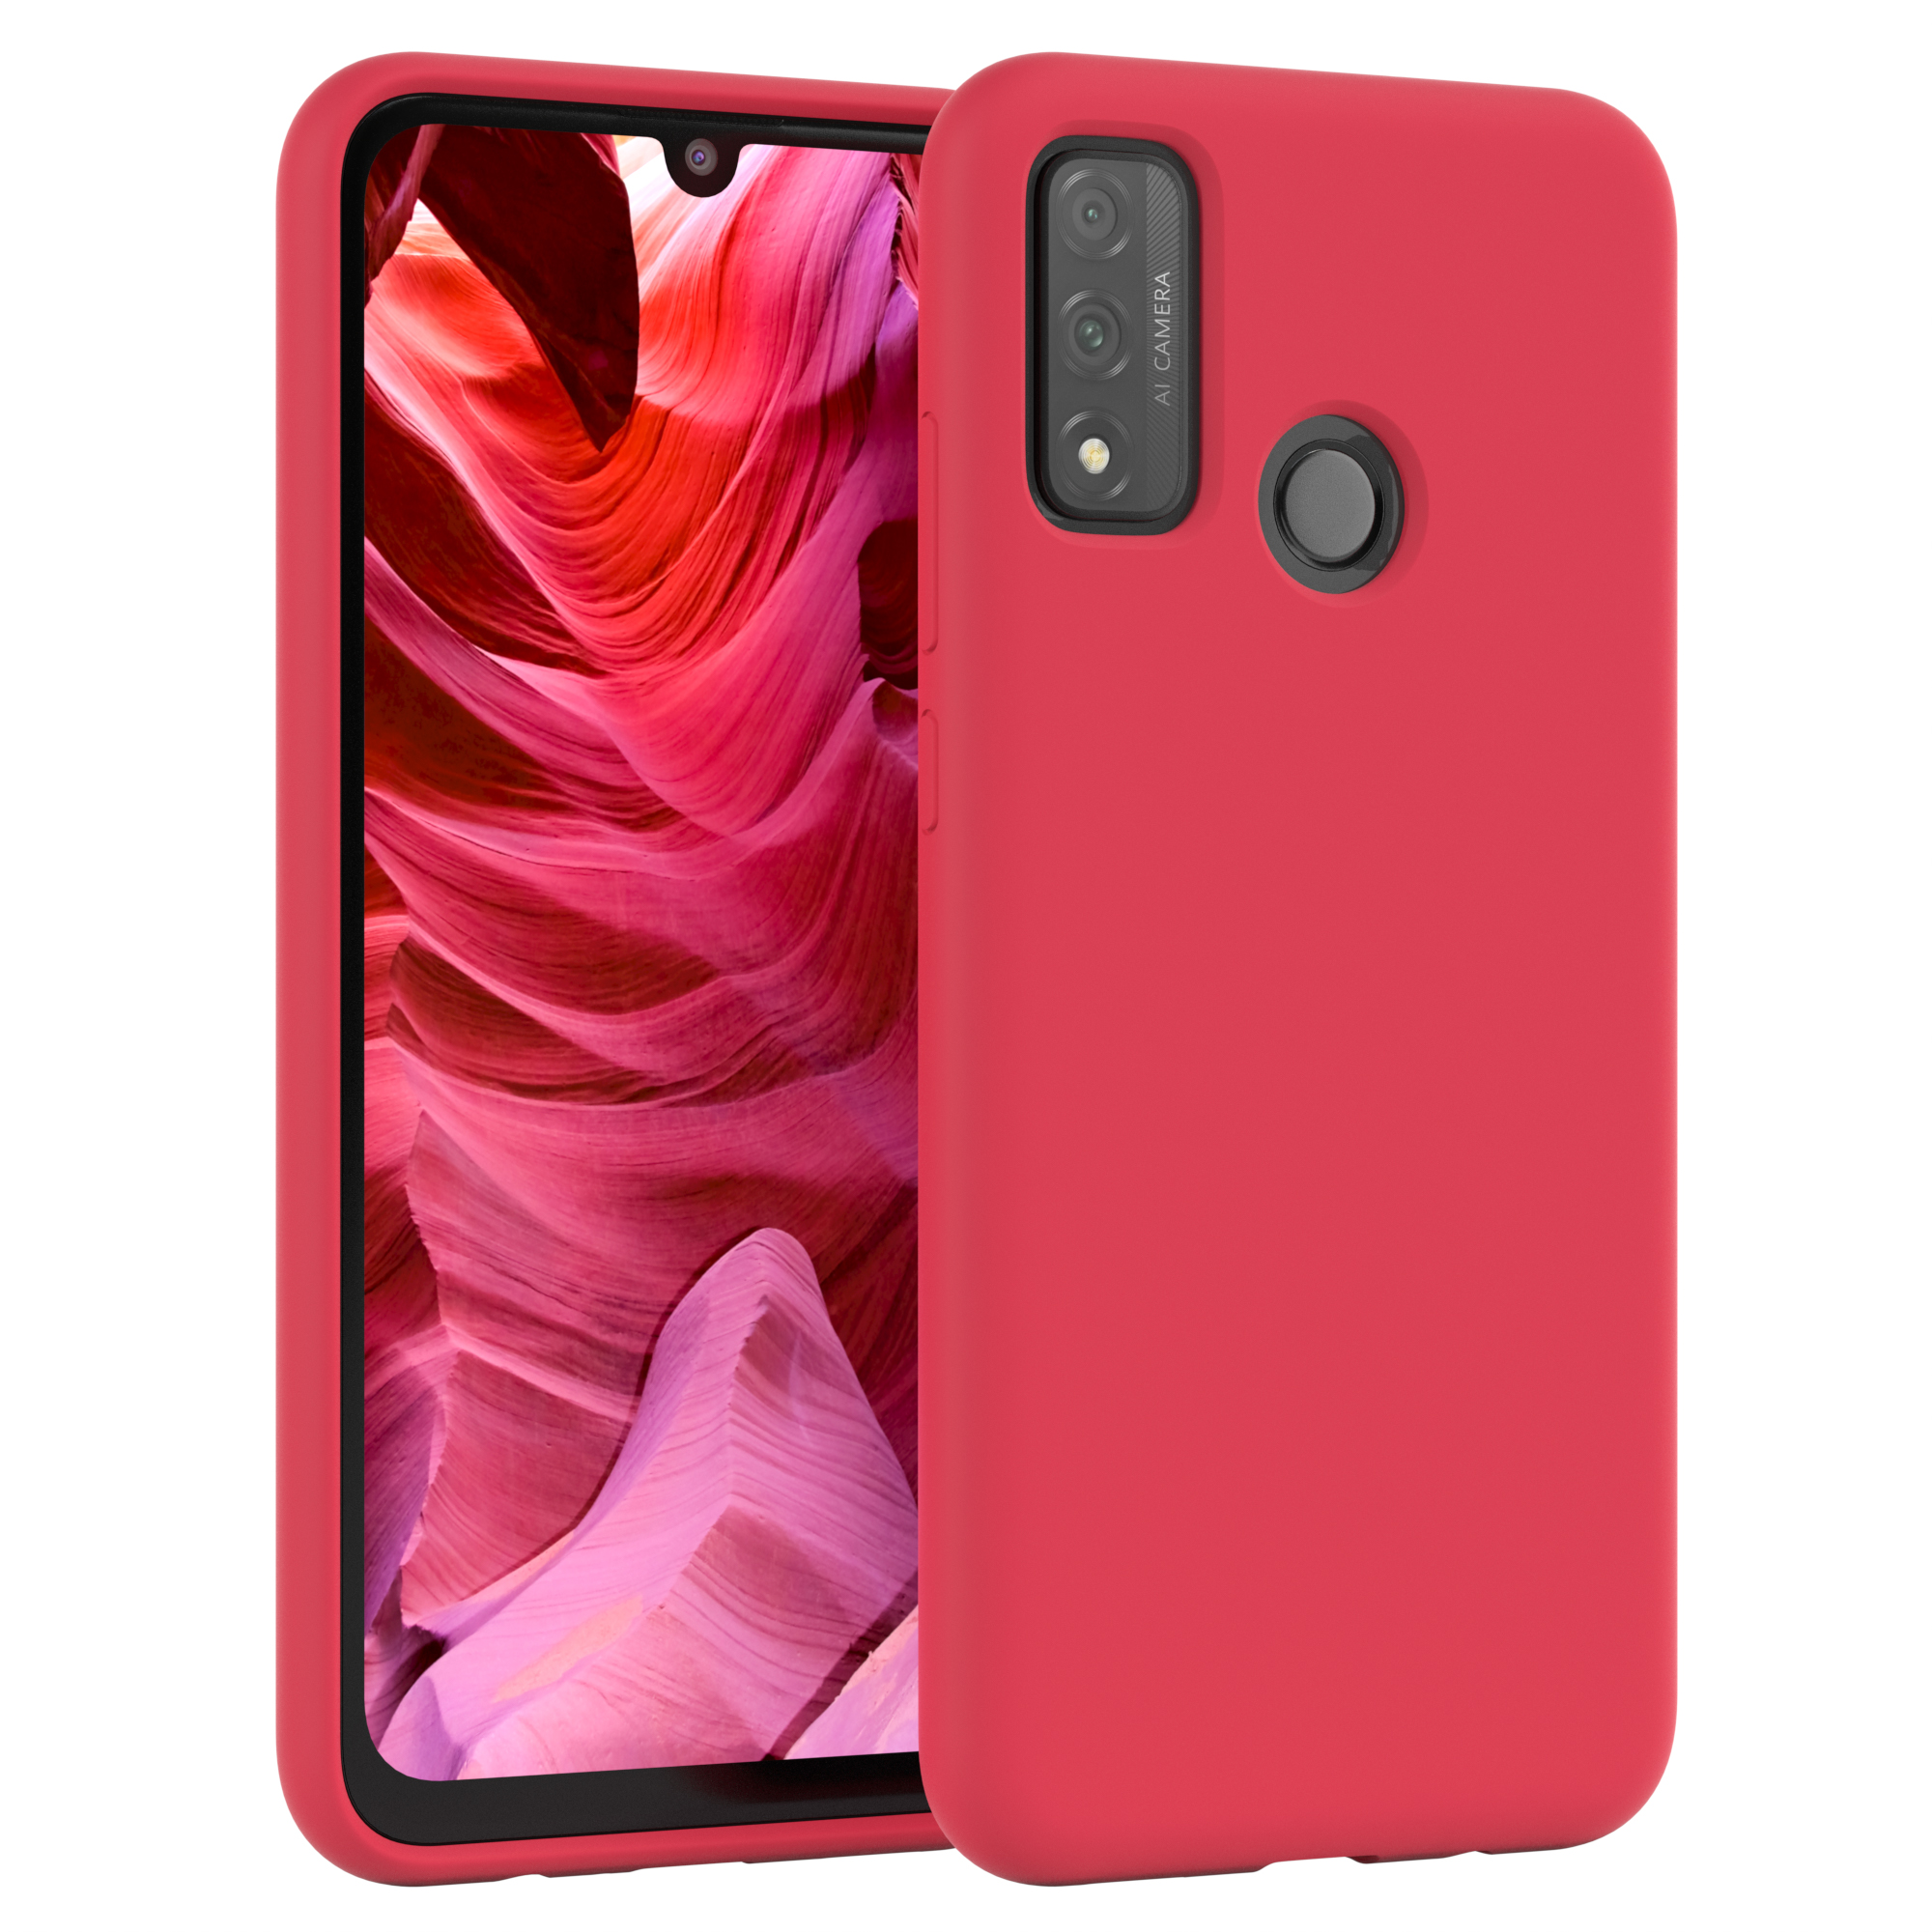 / EAZY Silikon Rot Huawei, Backcover, CASE Beere (2020), P Handycase, Premium Smart